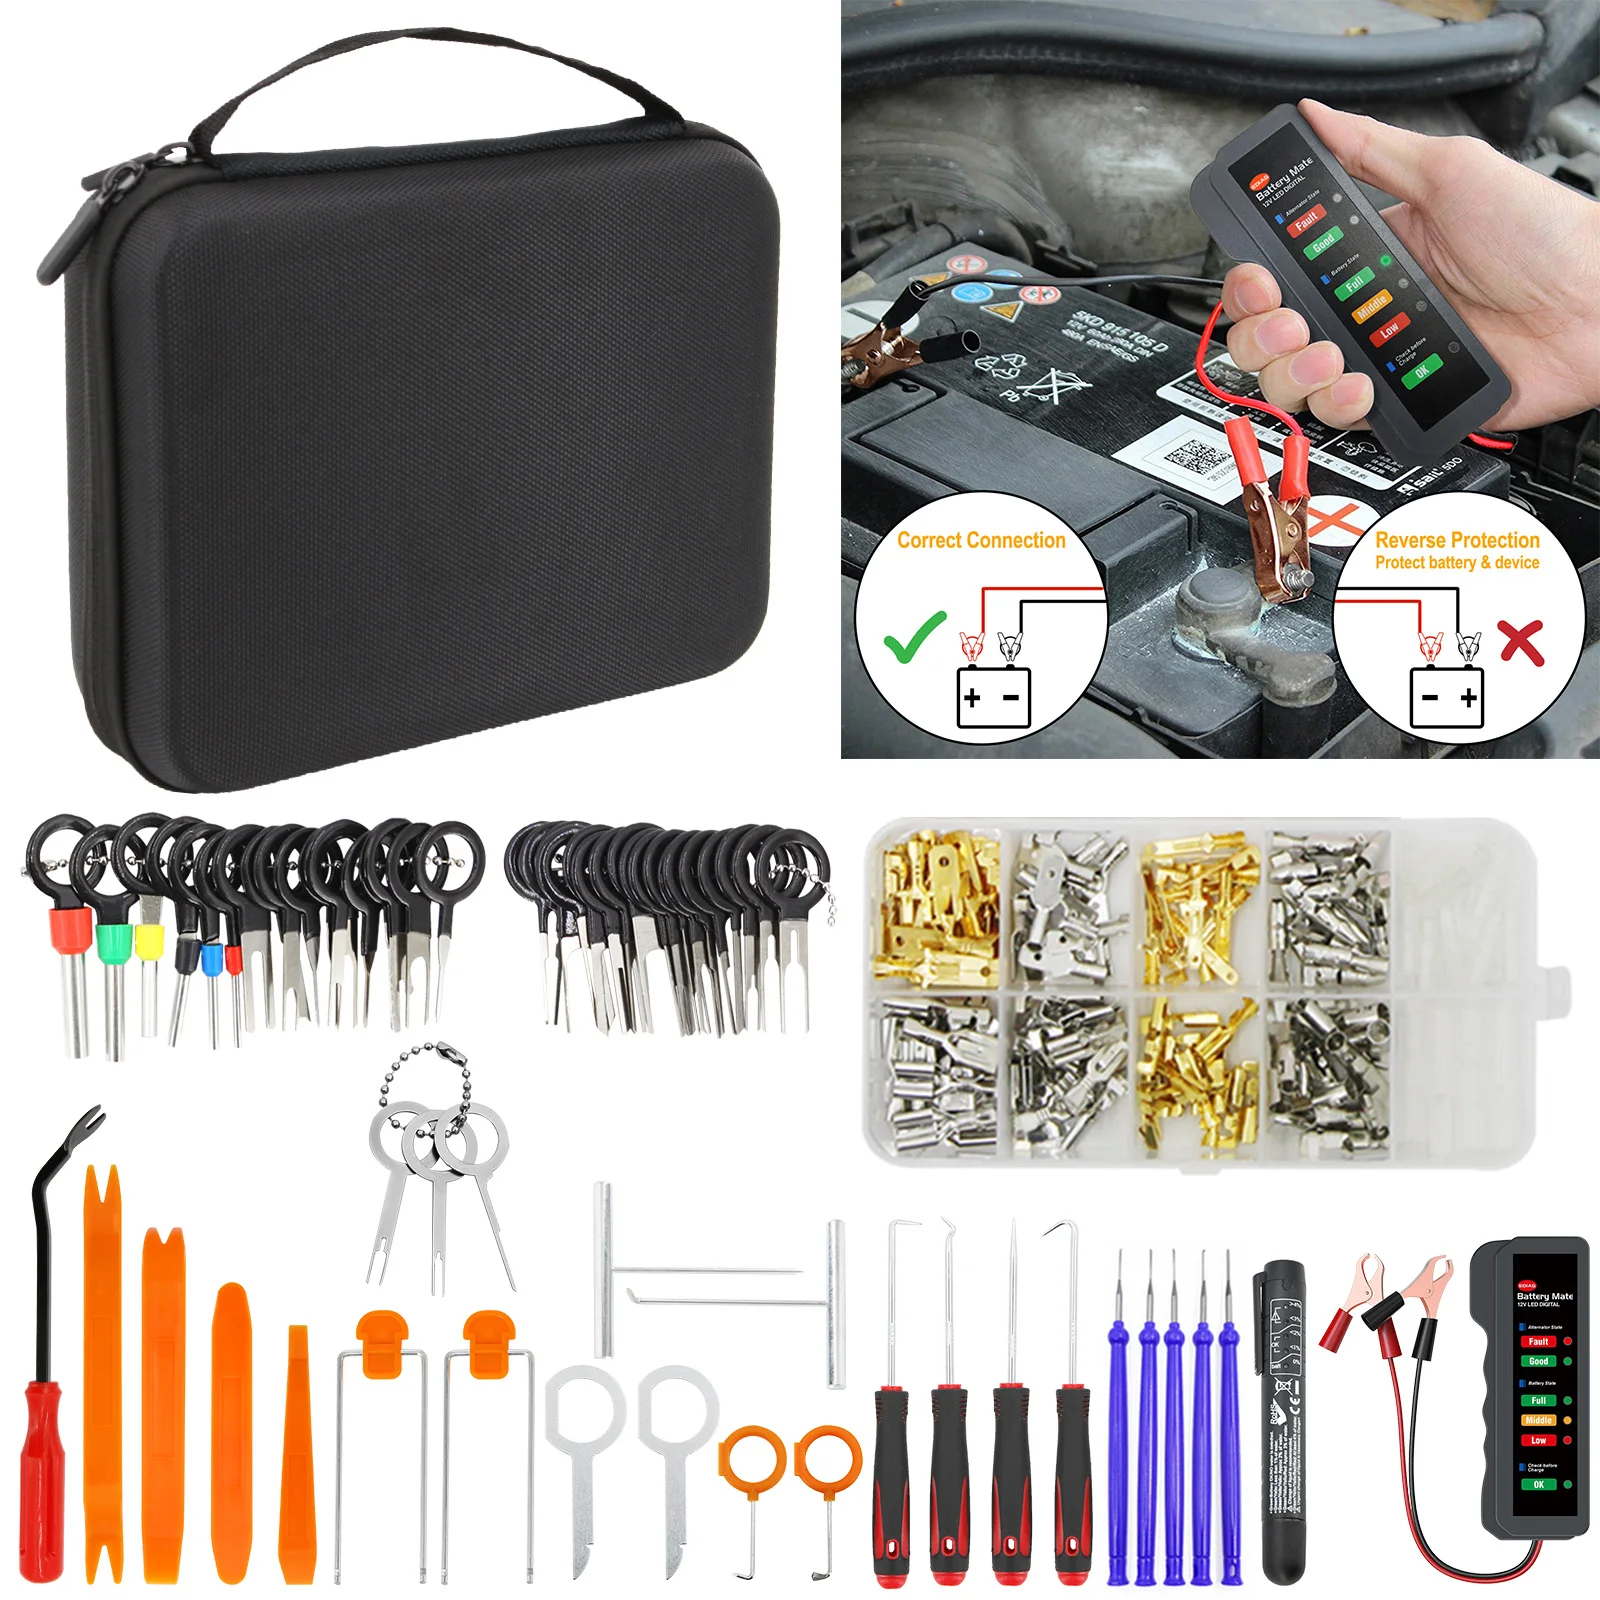 Car Terminal Removal Electrical Wiring Wire Harness Crimp Connector Pin Extractor Kit Repair Hand Tools Back Needle W/EVA Case